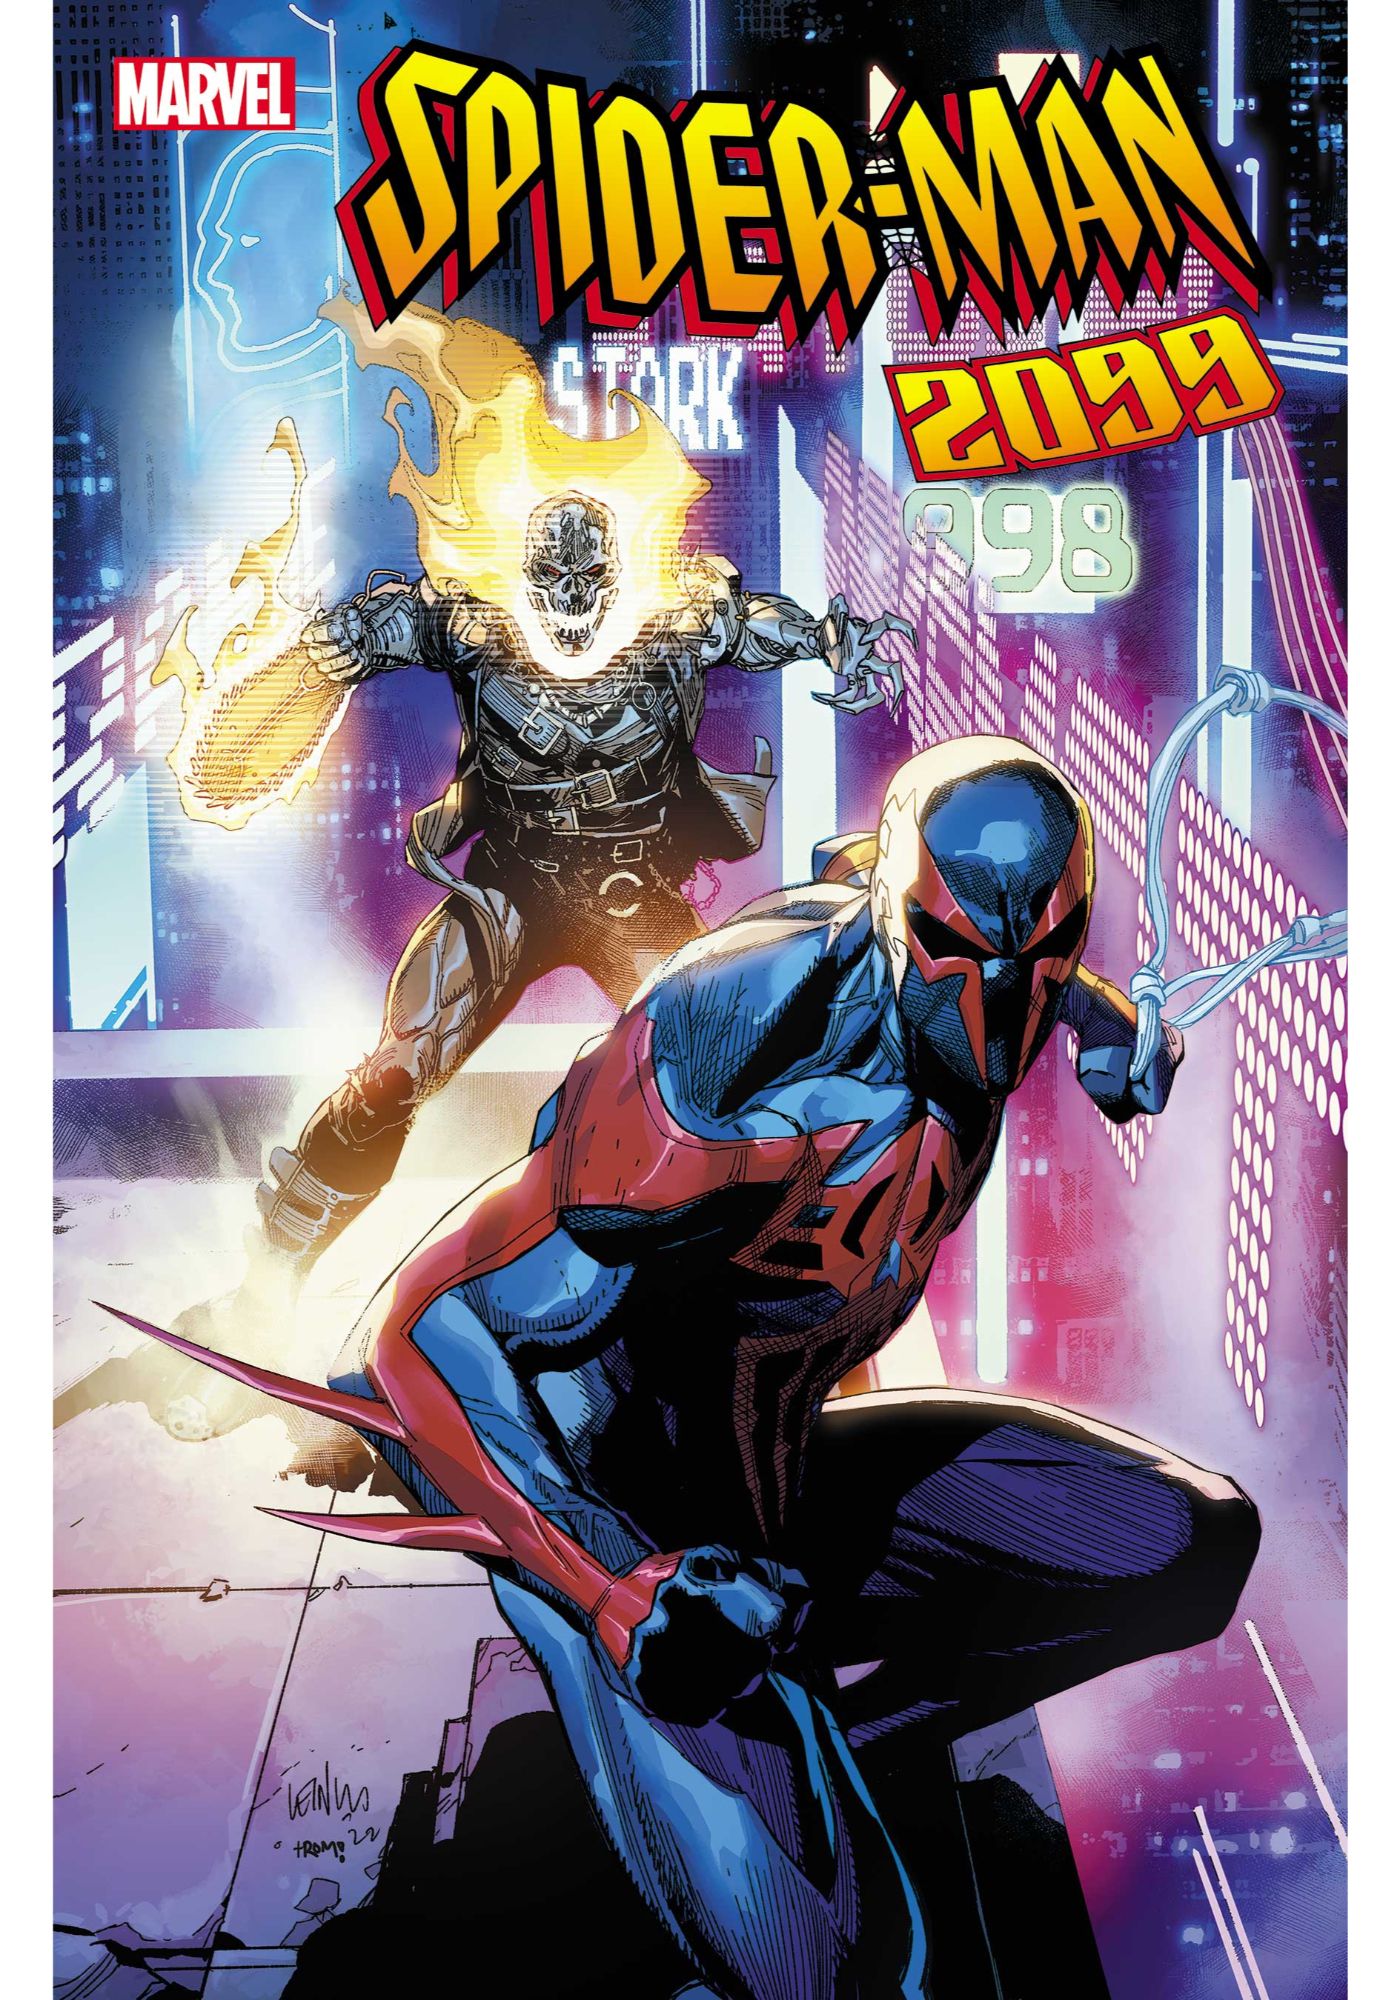 Marvel’s Winter Soldier 2099 To Debut In New Spider-Man 2099 Story